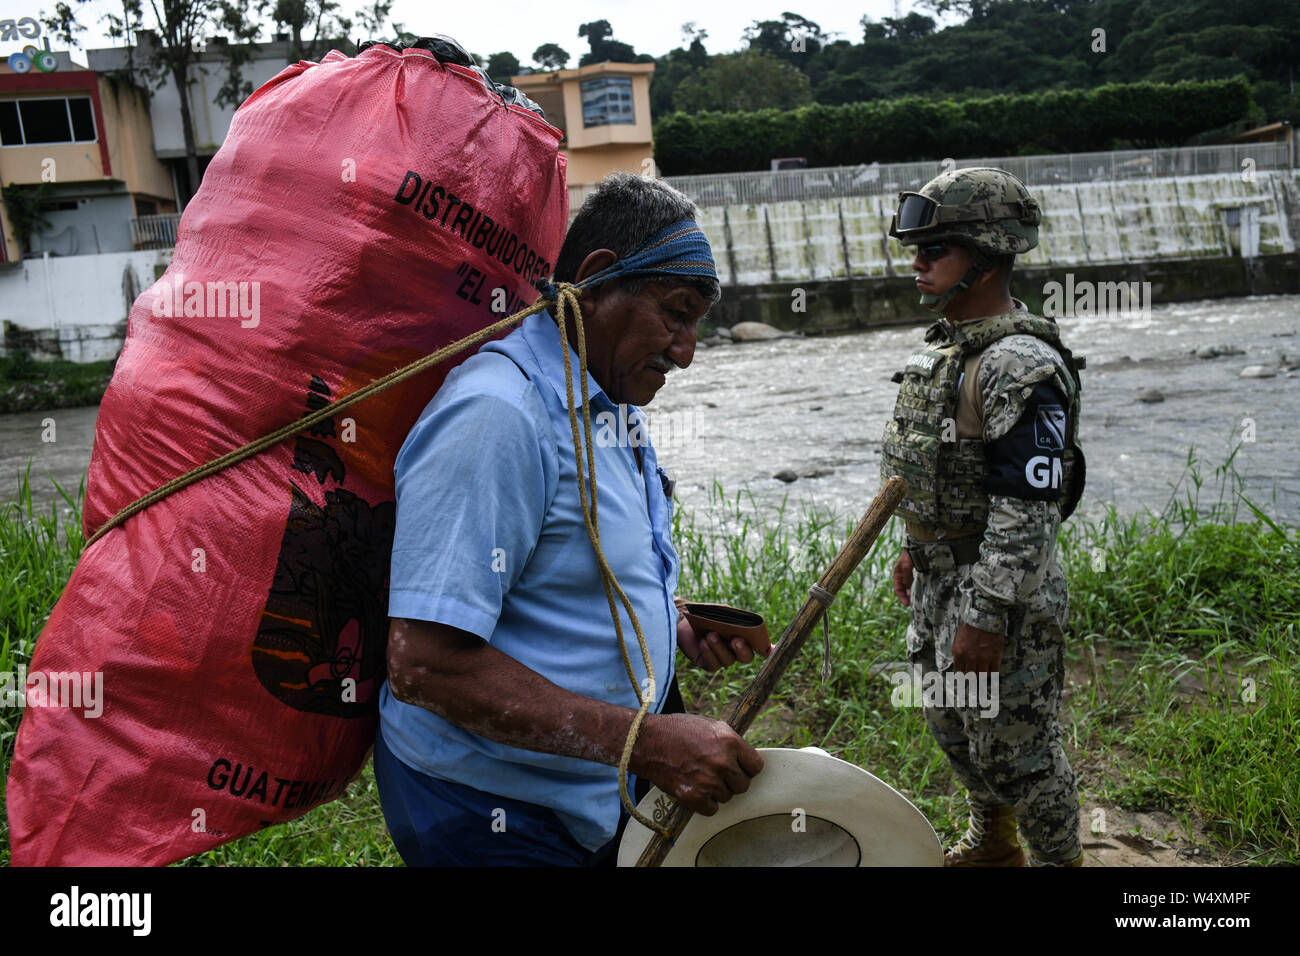 July 24, 2019, Talisman, Chiapas, Mexico: Mexican marines and immigration officers check IDs of Guatemalan porters crossing goods illegally into Mexican territory on Wednesday. Hundreds of such crossings happen every day as the flow of migrants has moved to isolated spots along the Suchiate River, which marks the border between the two nations. Mexican President Lopez Obrador's administration claims to have reduced the flow of migrants looking to reach America, but much of the flow continues in remote border areas. Credit: Miguel Juarez Lugo/ZUMA Wire/Alamy Live News Stock Photo